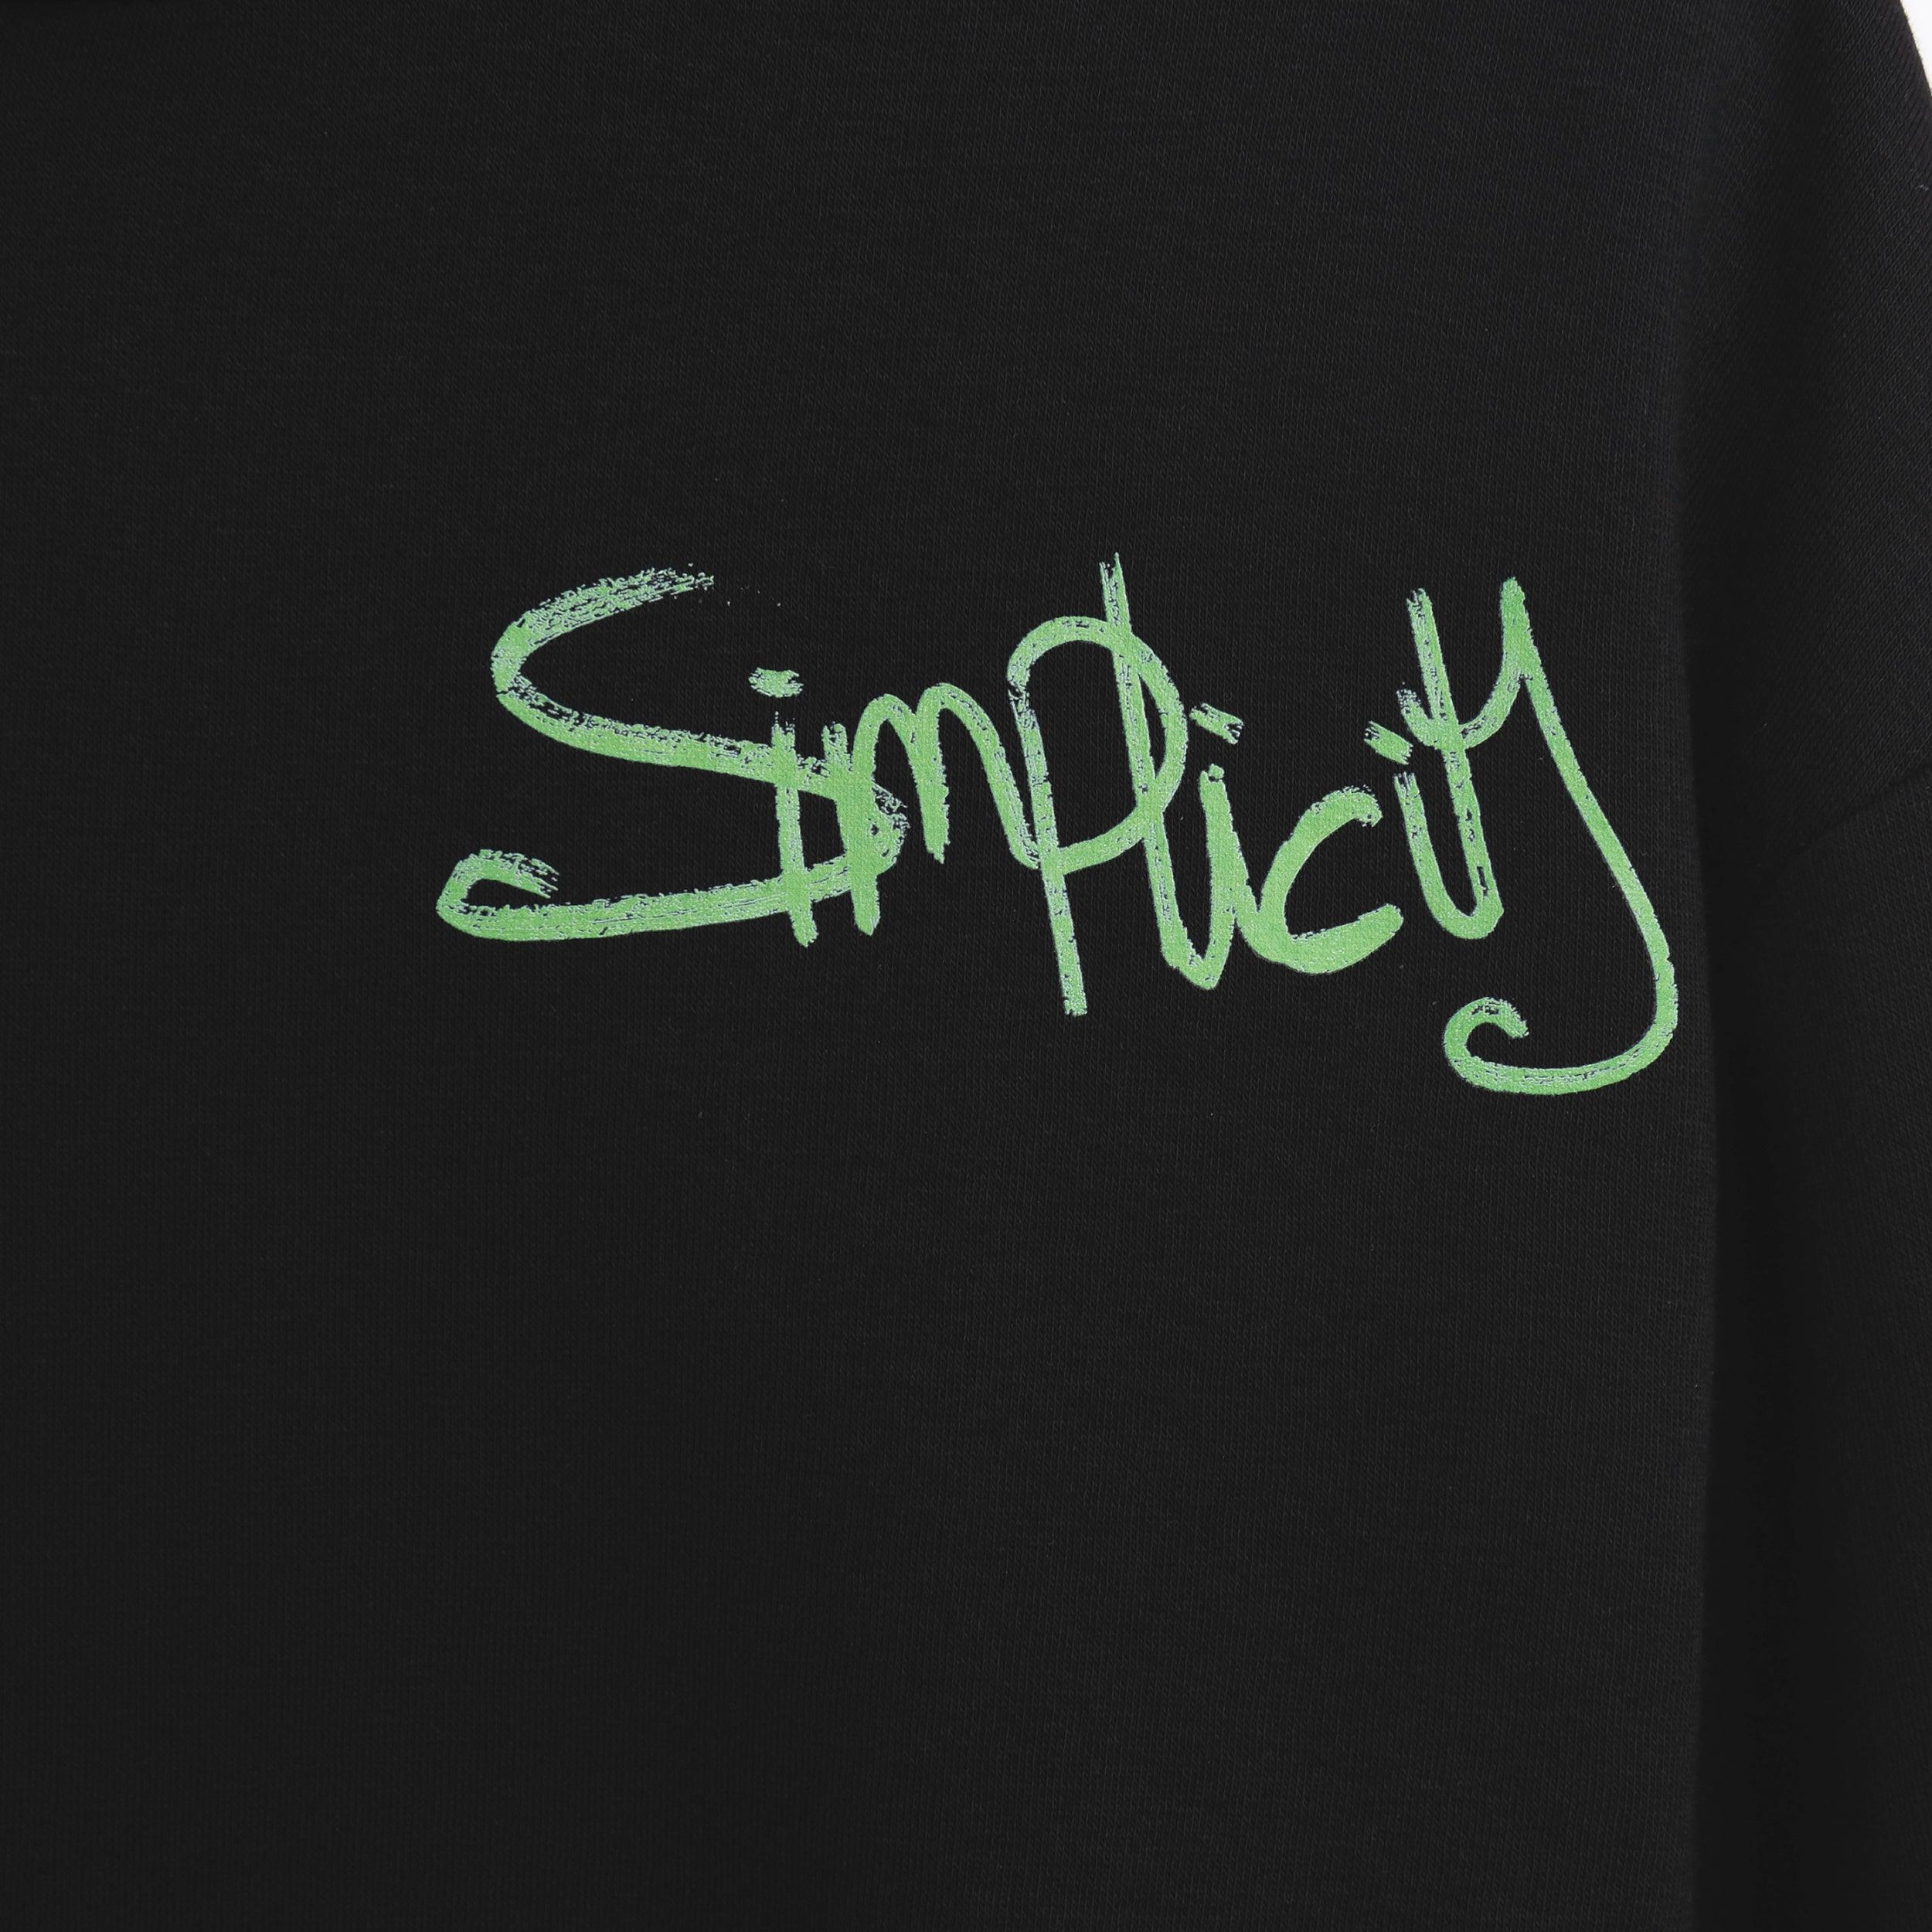 Black hoodie with white and green letters From Iris - WECRE8